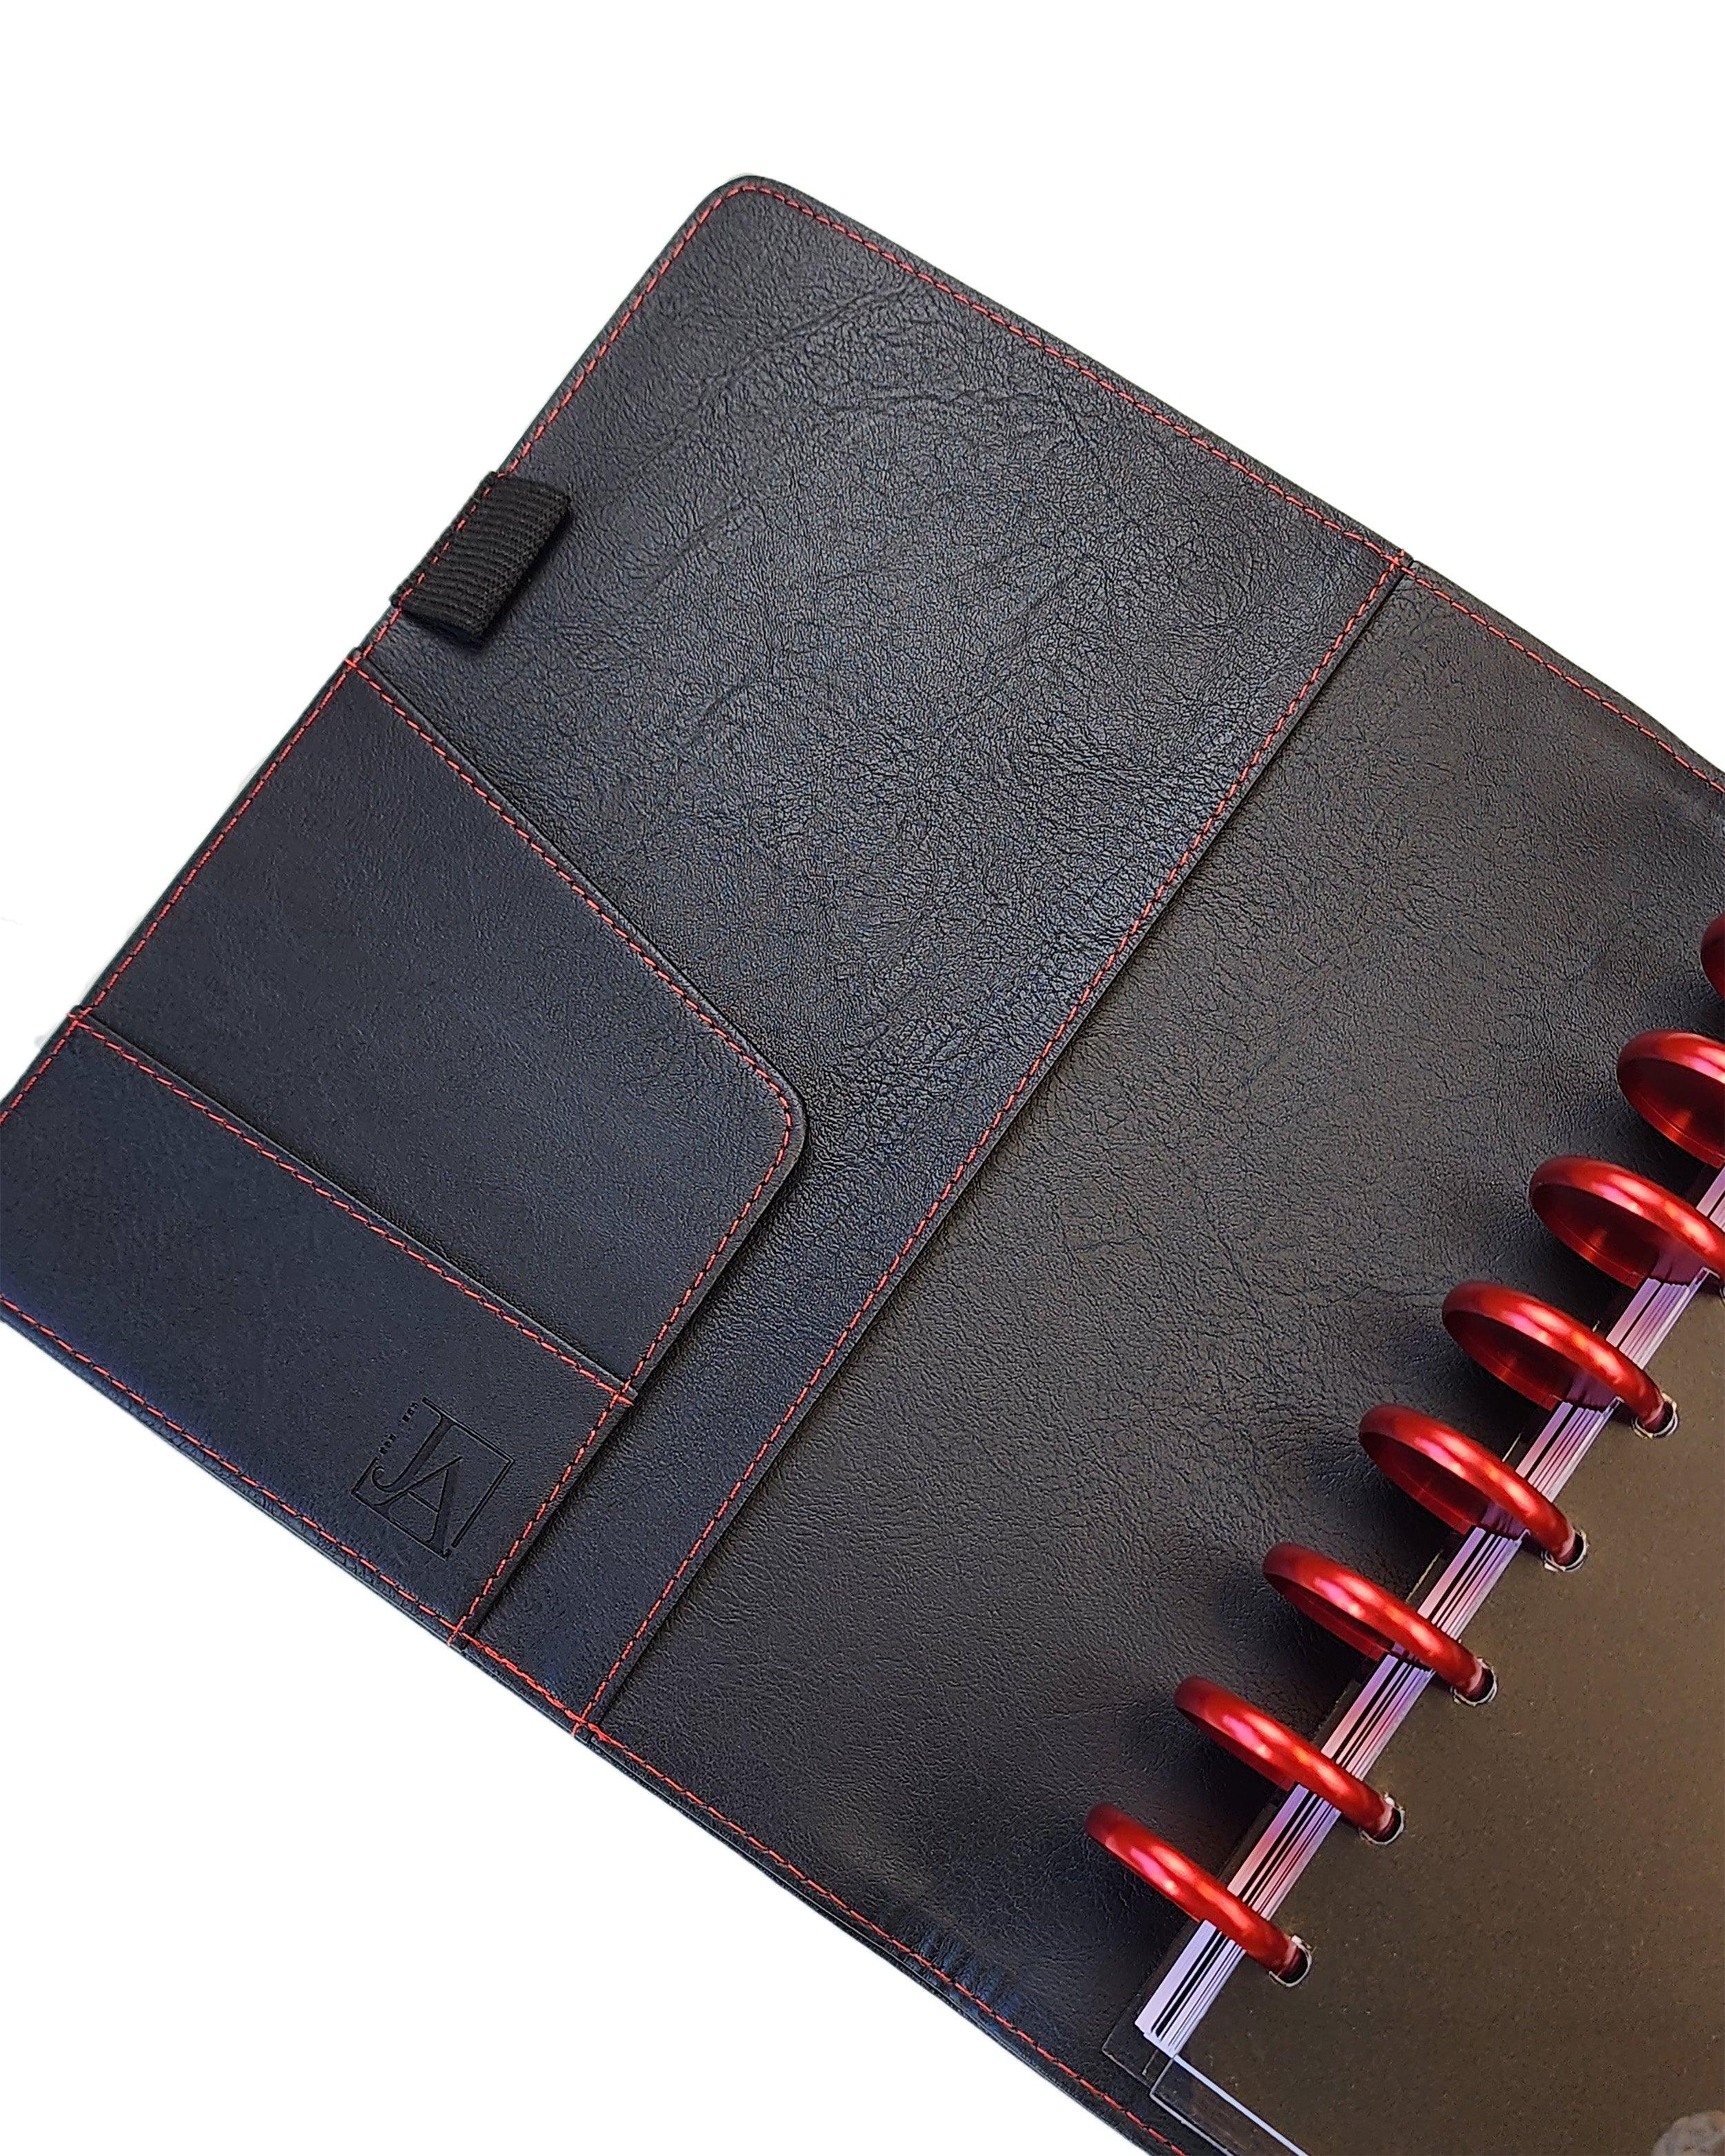 Vegan leather in black with red stitching discbound planner cover and planner notebook portfolio for discbound planners by Janes Agenda.